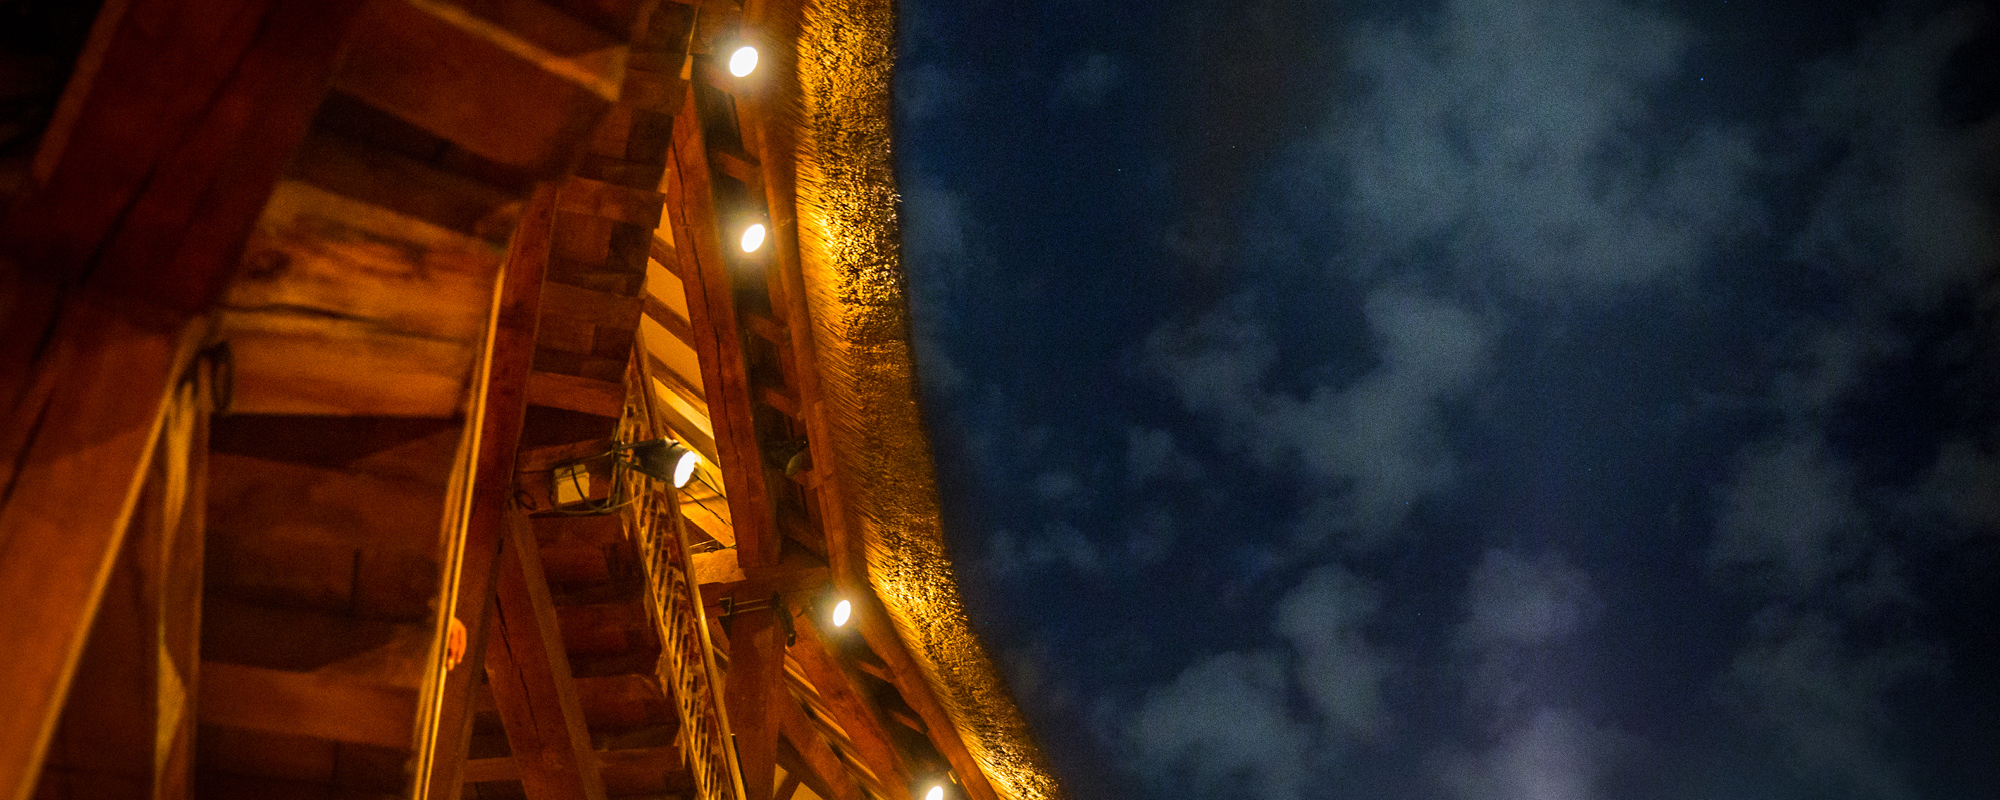 A close up of the corner of a roof of an open-air theatre, that shows an open sky and wooden beams